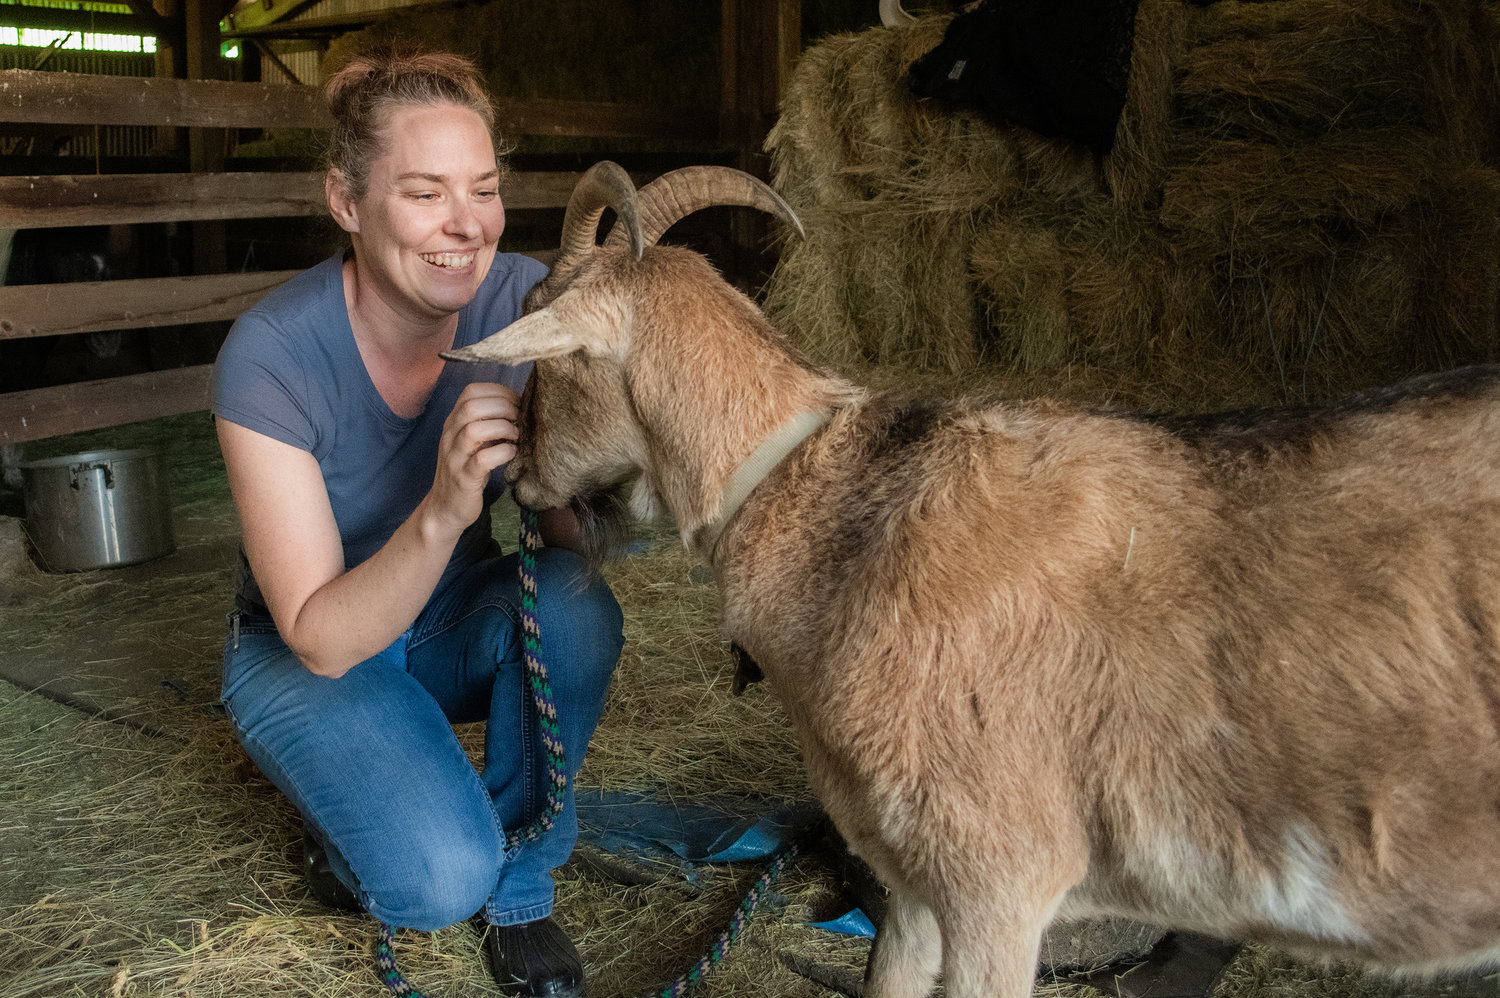 Christy Gillette smiles while petting Chester, a Nigerian dwarf goat, Saturday afternoon in La Center.